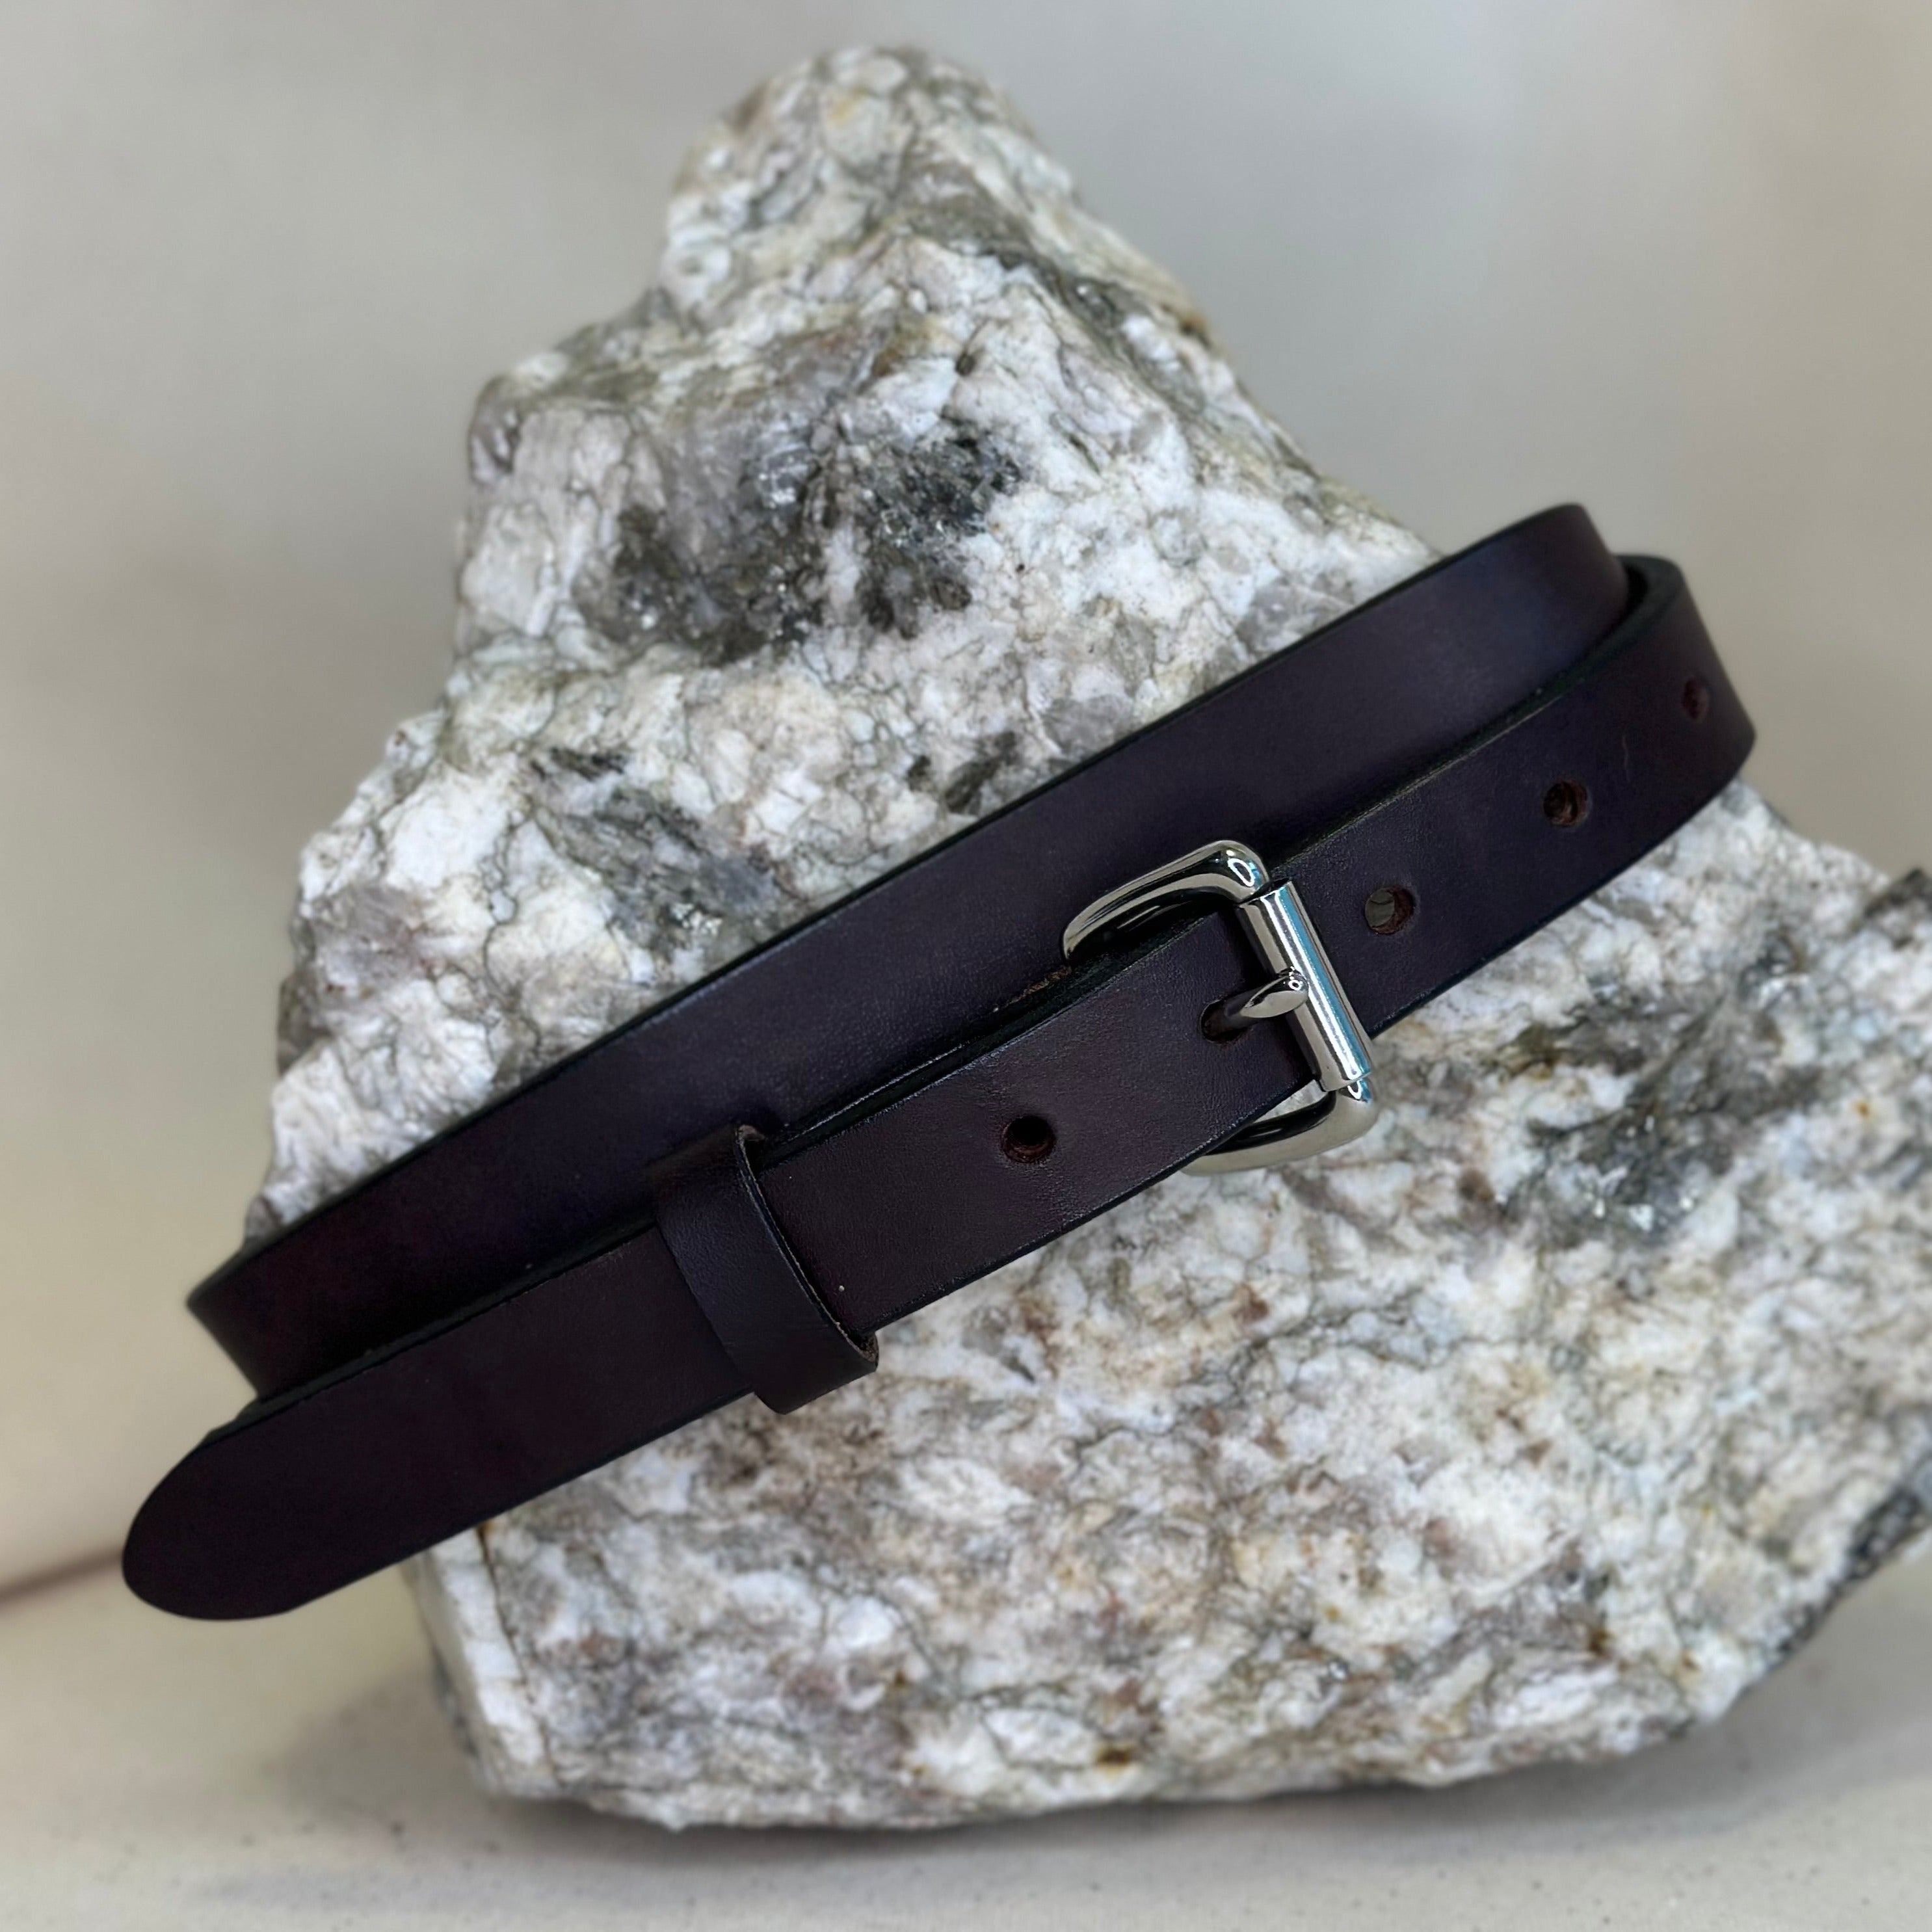 Shining Rock Goods handmade solid leather black one inch belt with a nickel silver roller belt buckle